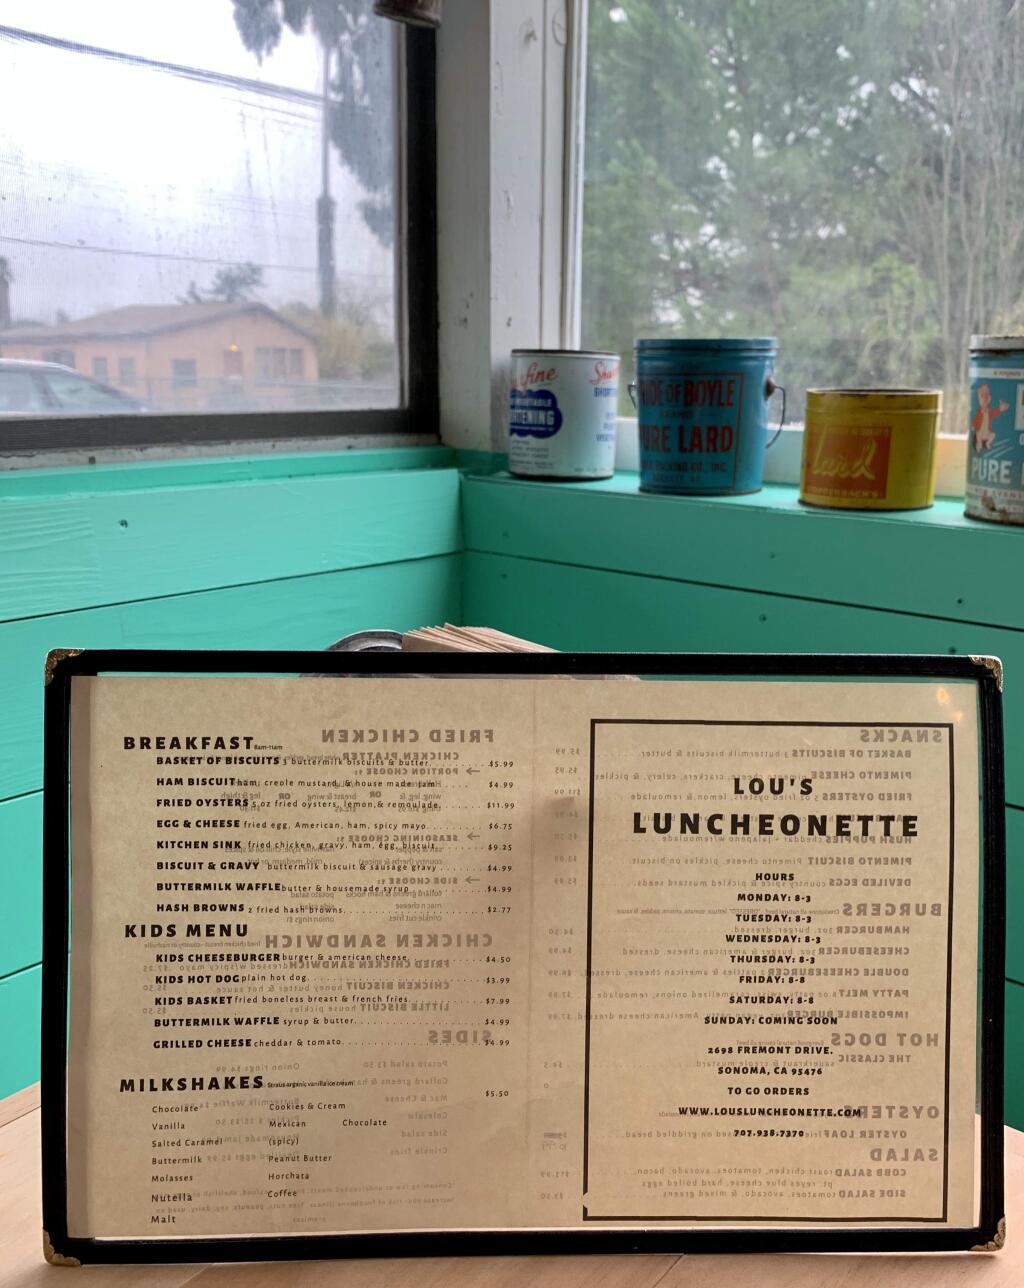 The exterior still looks like Boxcar but the Lou's Luncheonette menu is almost all new.